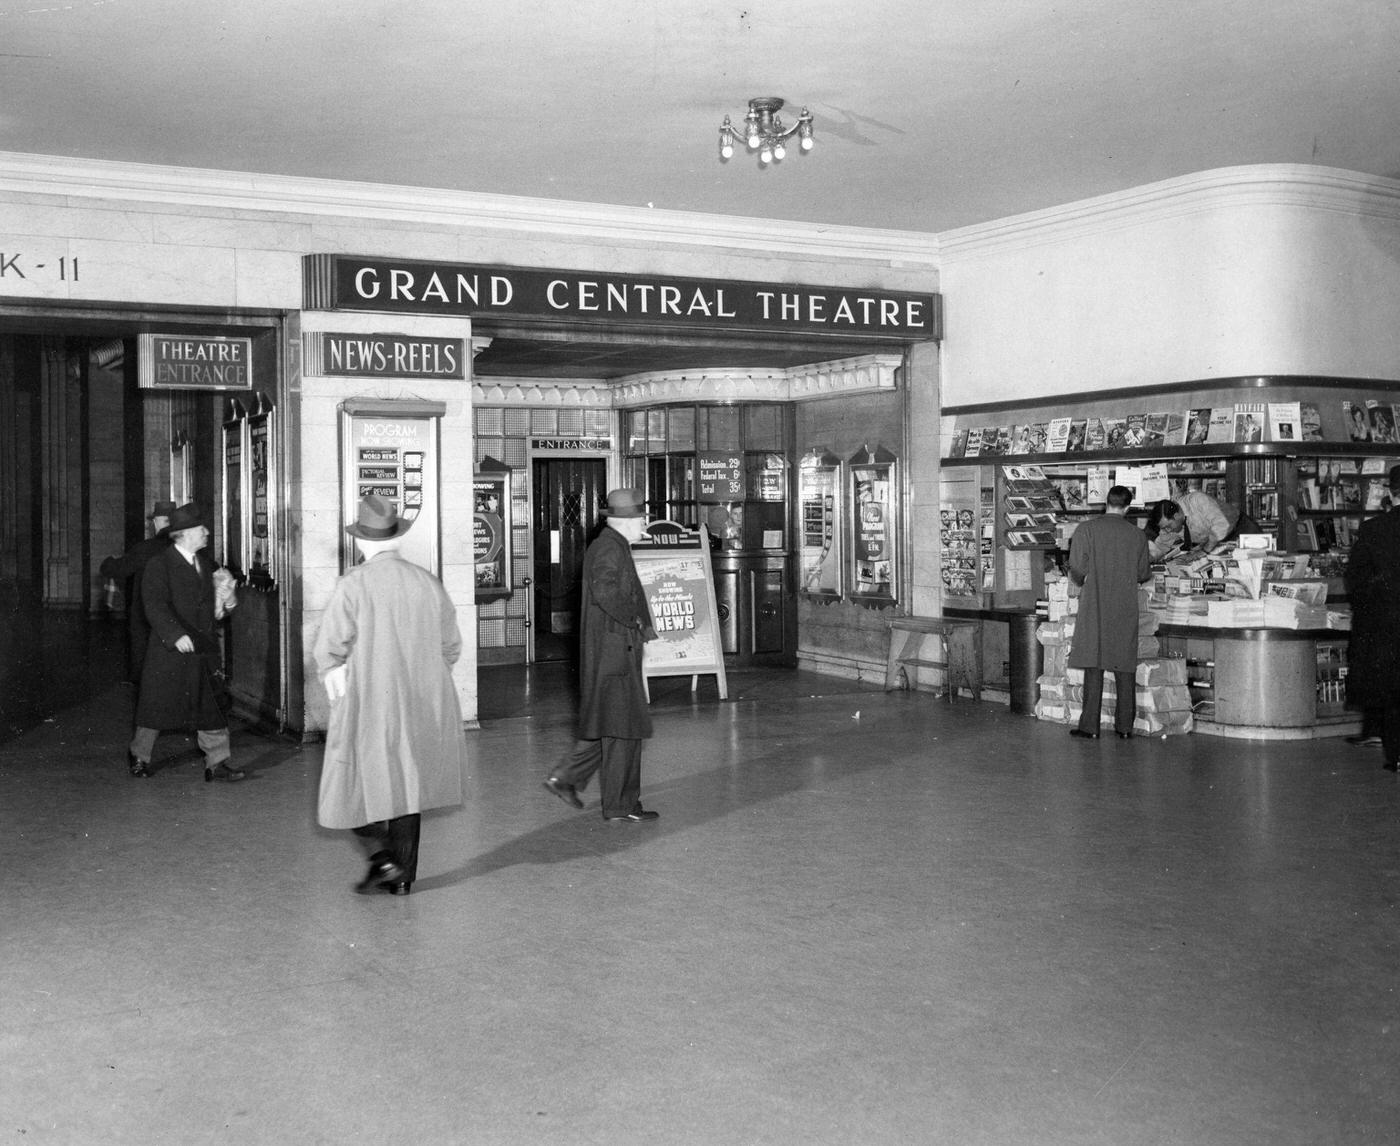 Entrance To Grand Central Theatre In Grand Central Station, Manhattan, 1956